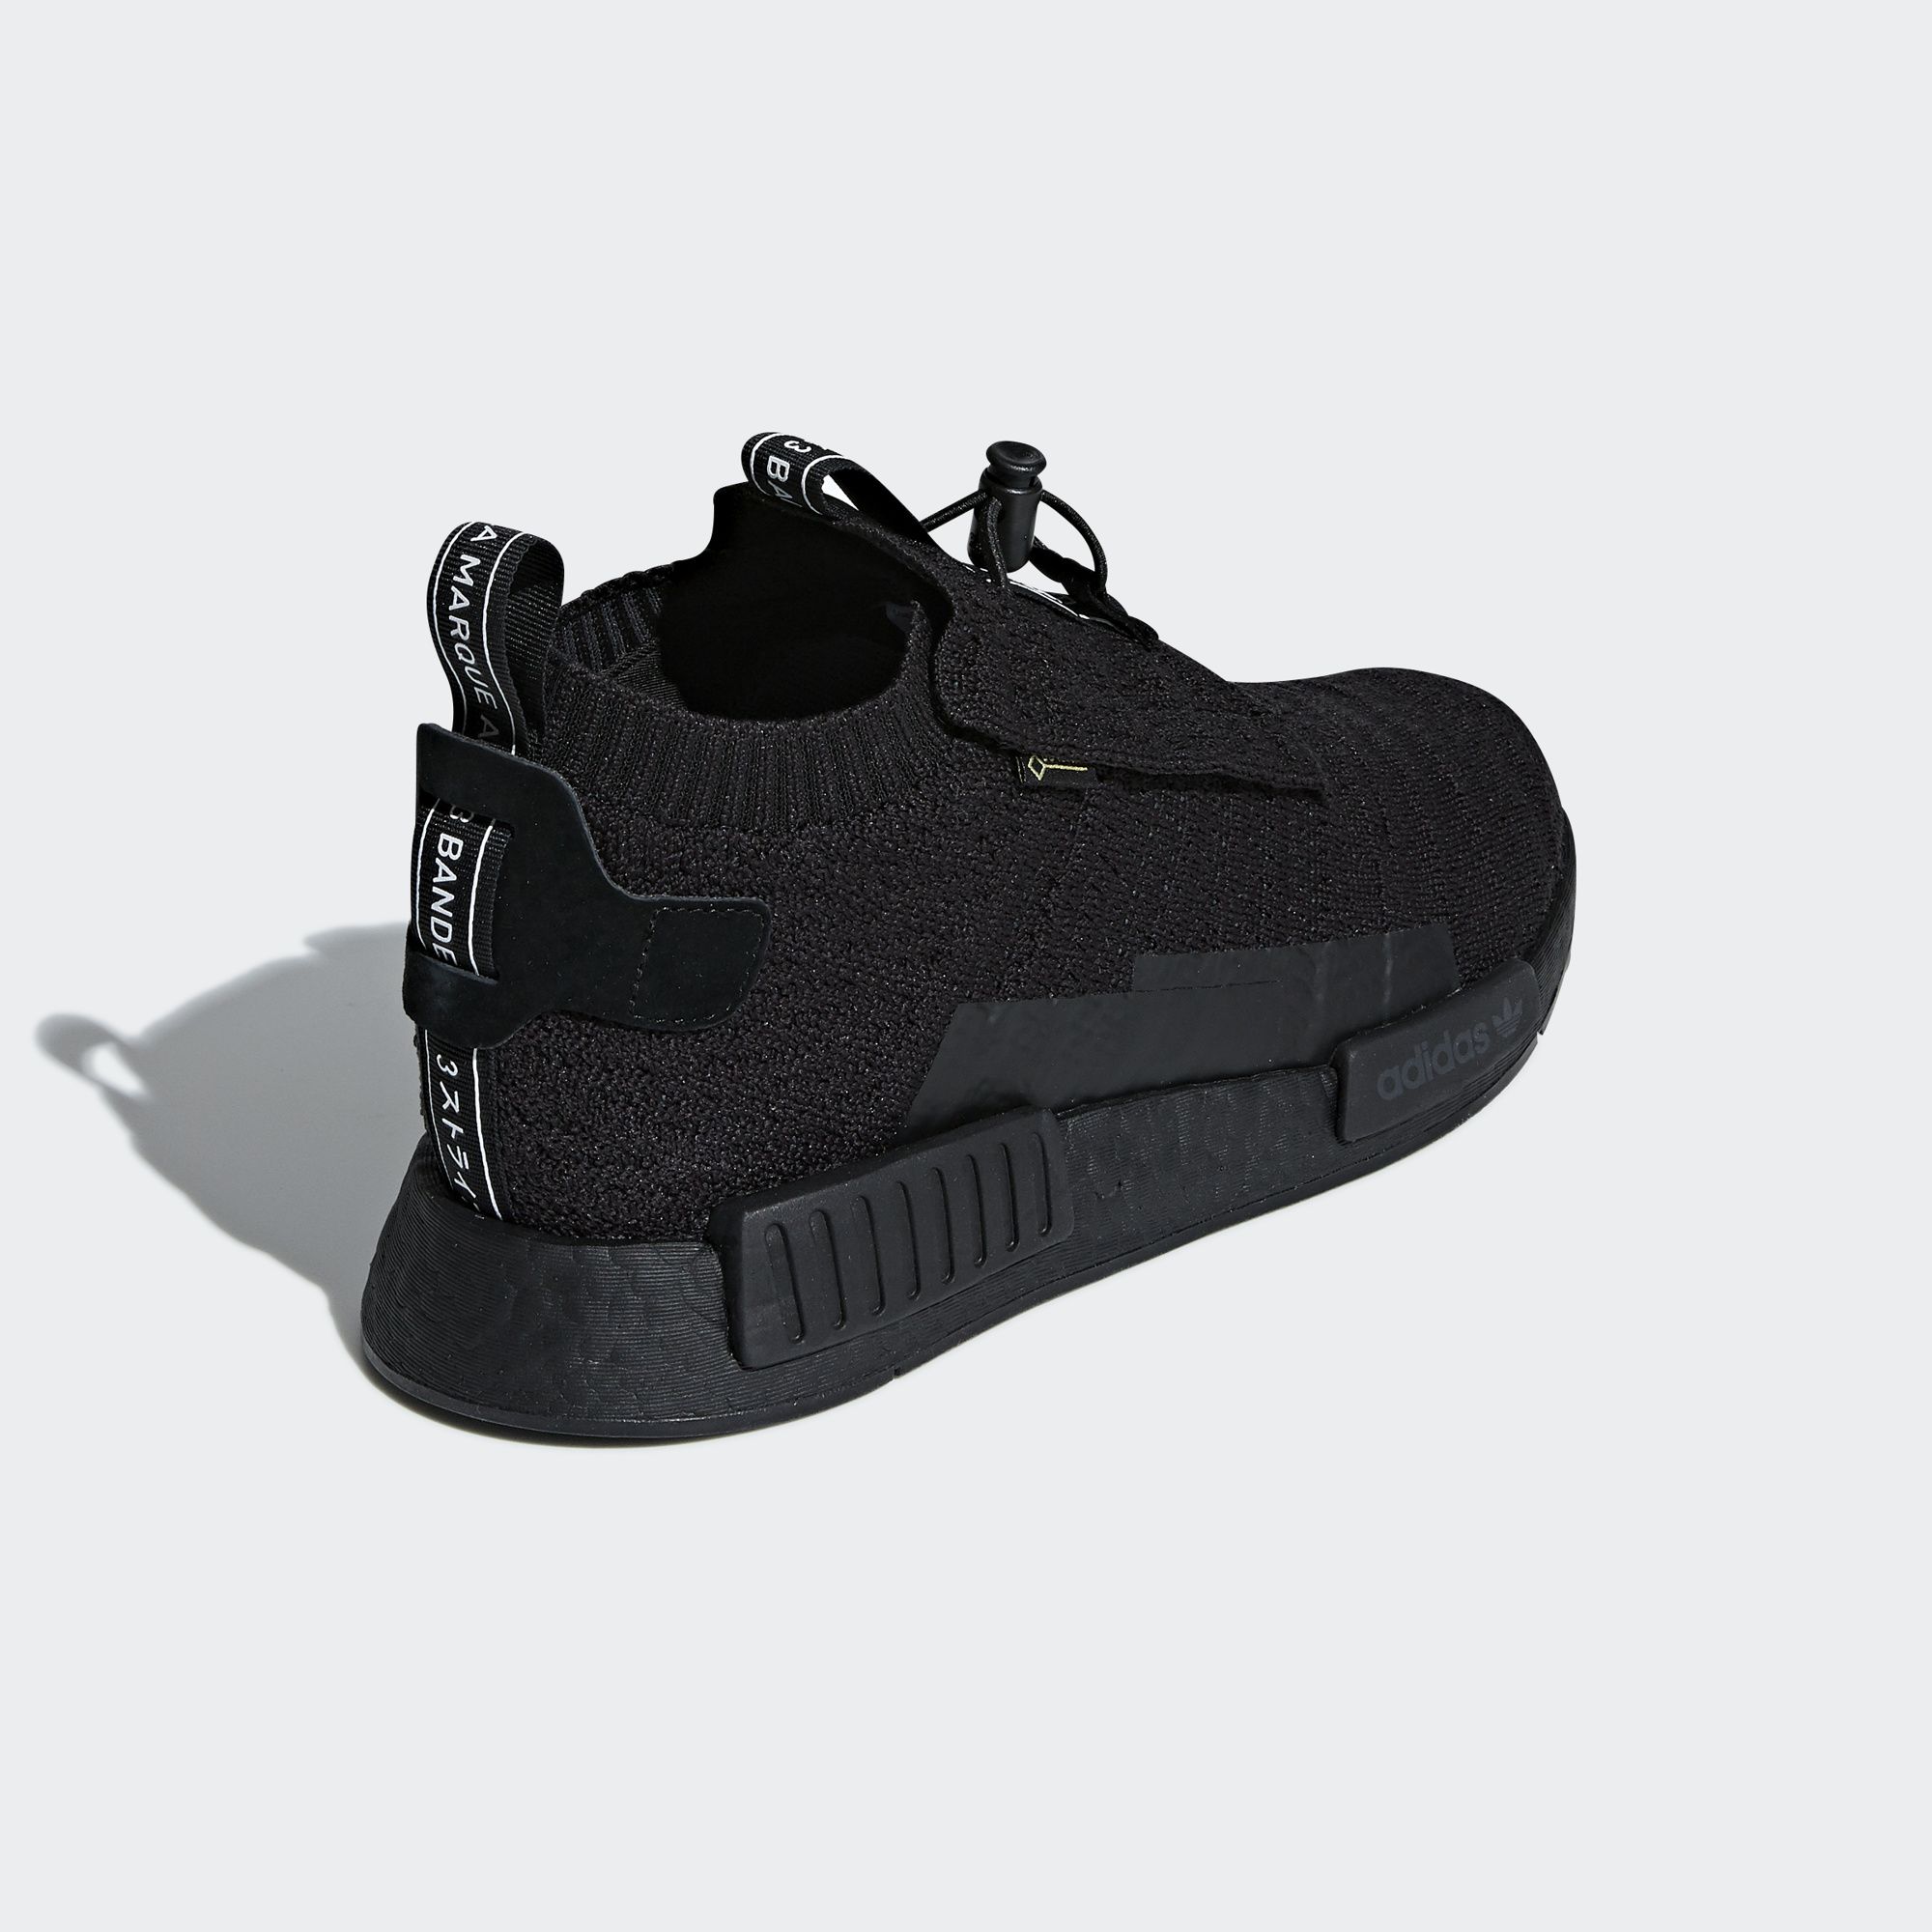 The adidas NMD TS1 'GORE-TEX' Has a 